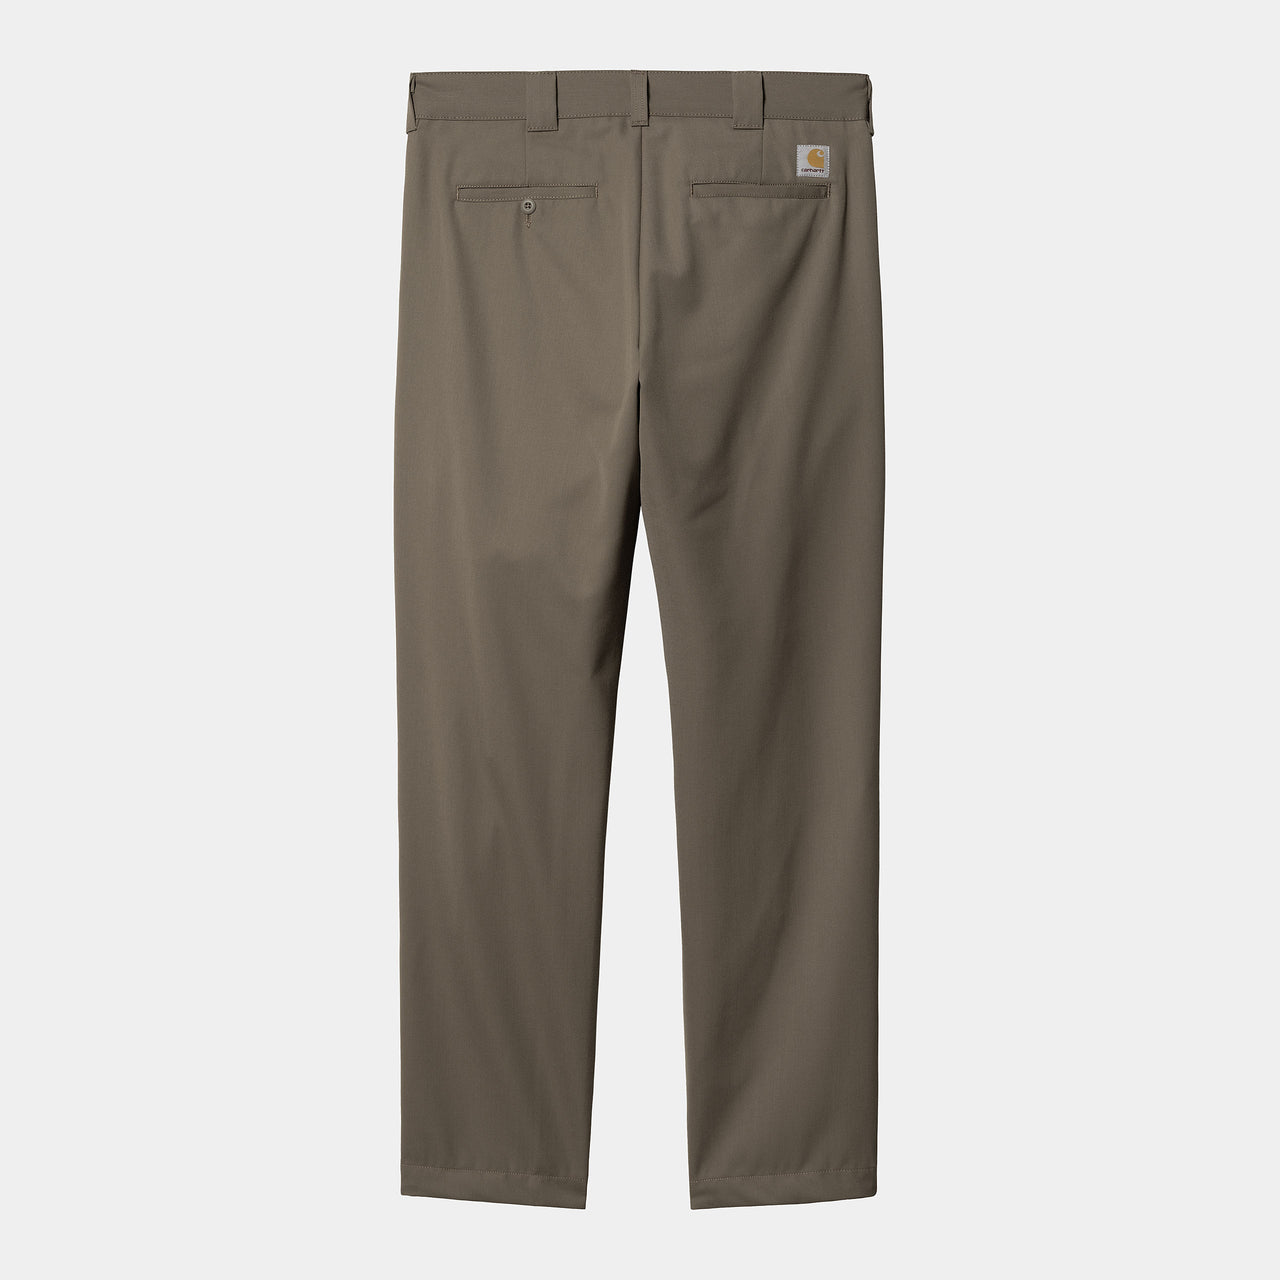 MASTER PANTS BY CARHARTT WIP